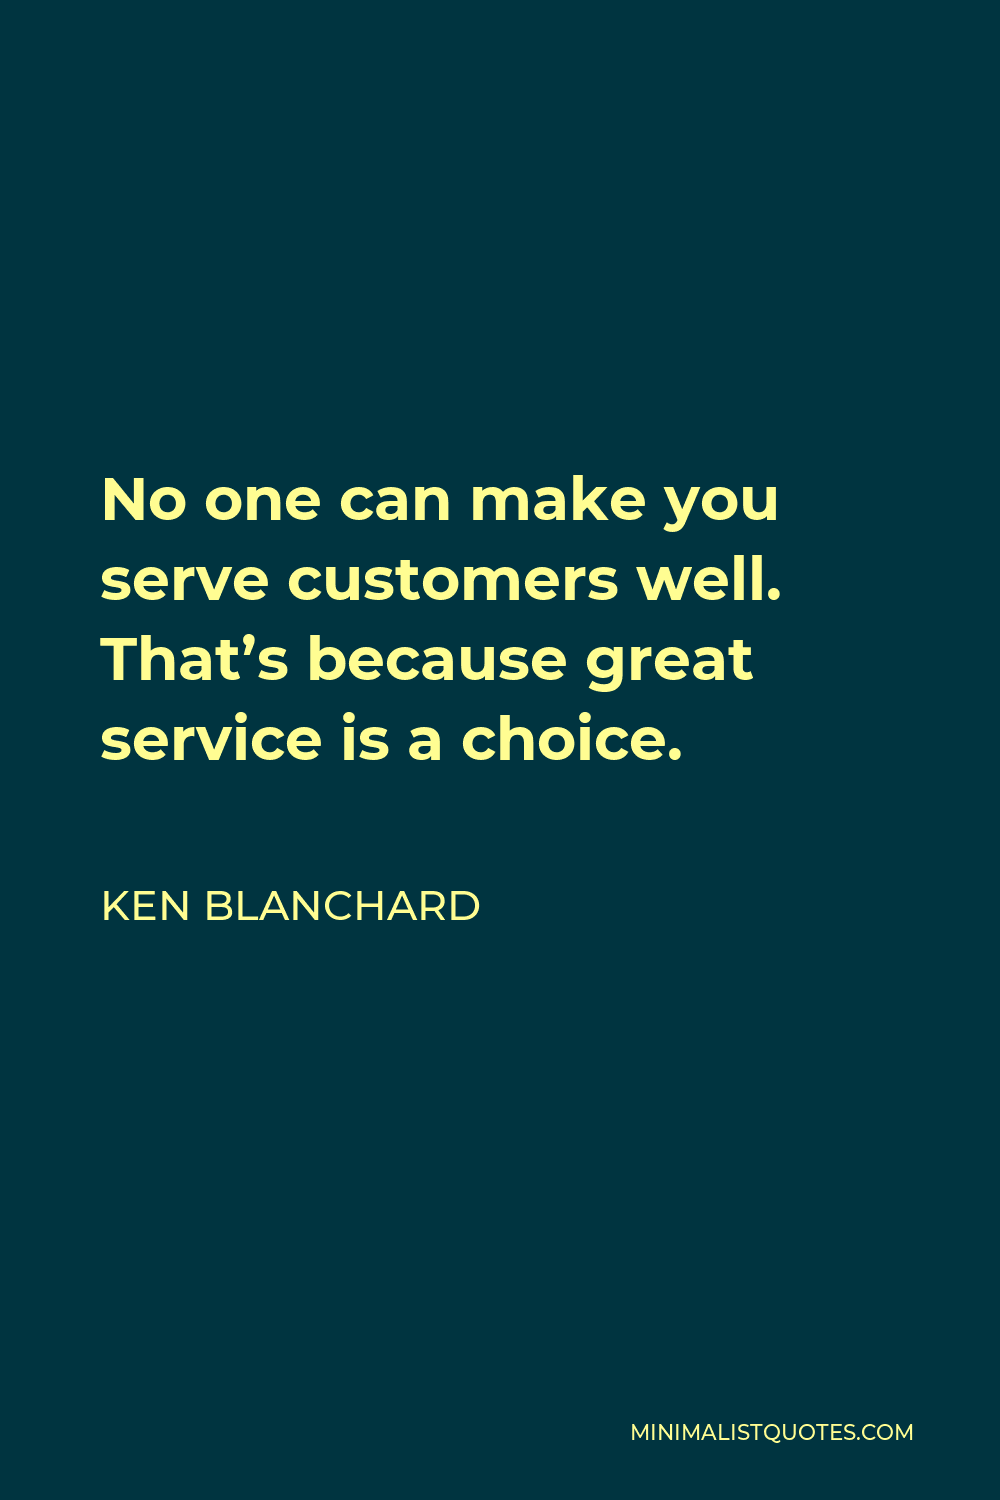 Ken Blanchard Quote - No one can make you serve customers well. That’s because great service is a choice.